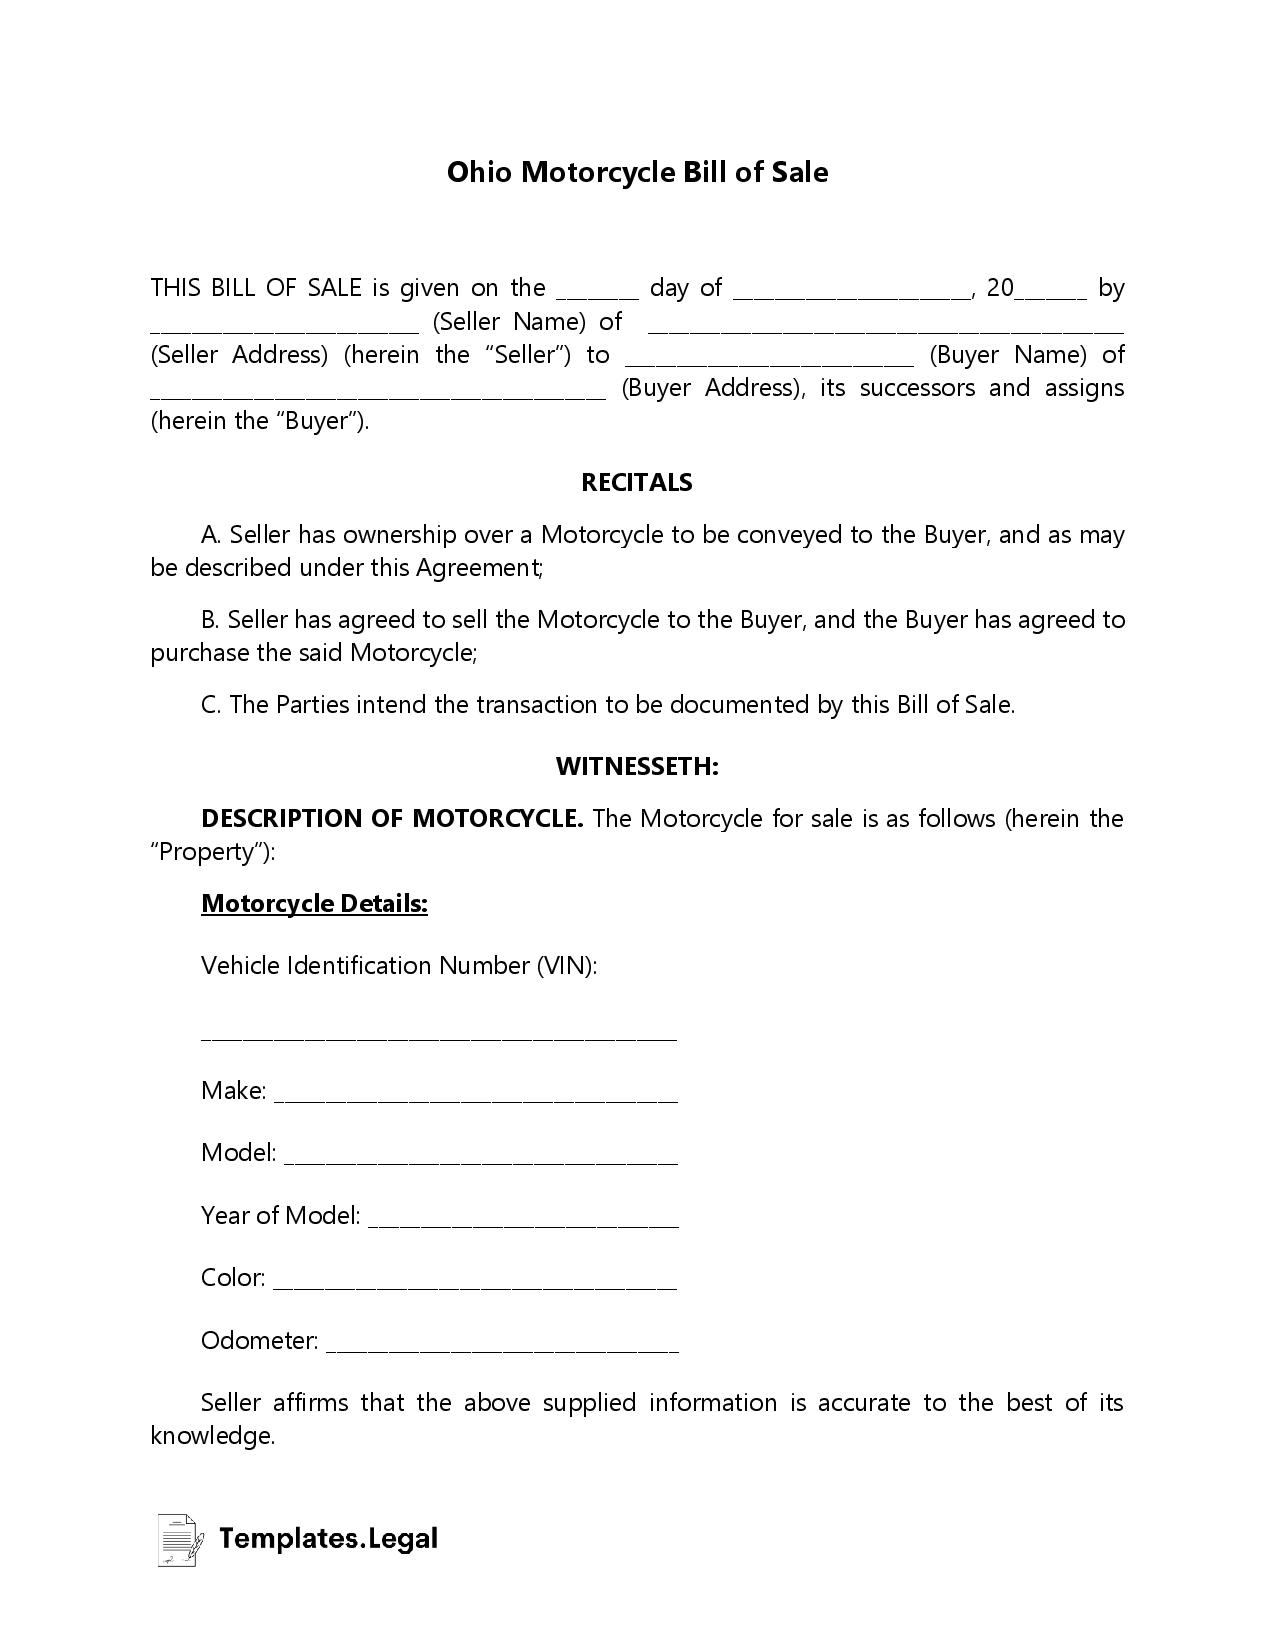 Ohio Motorcycle Bill of Sale - Templates.Legal